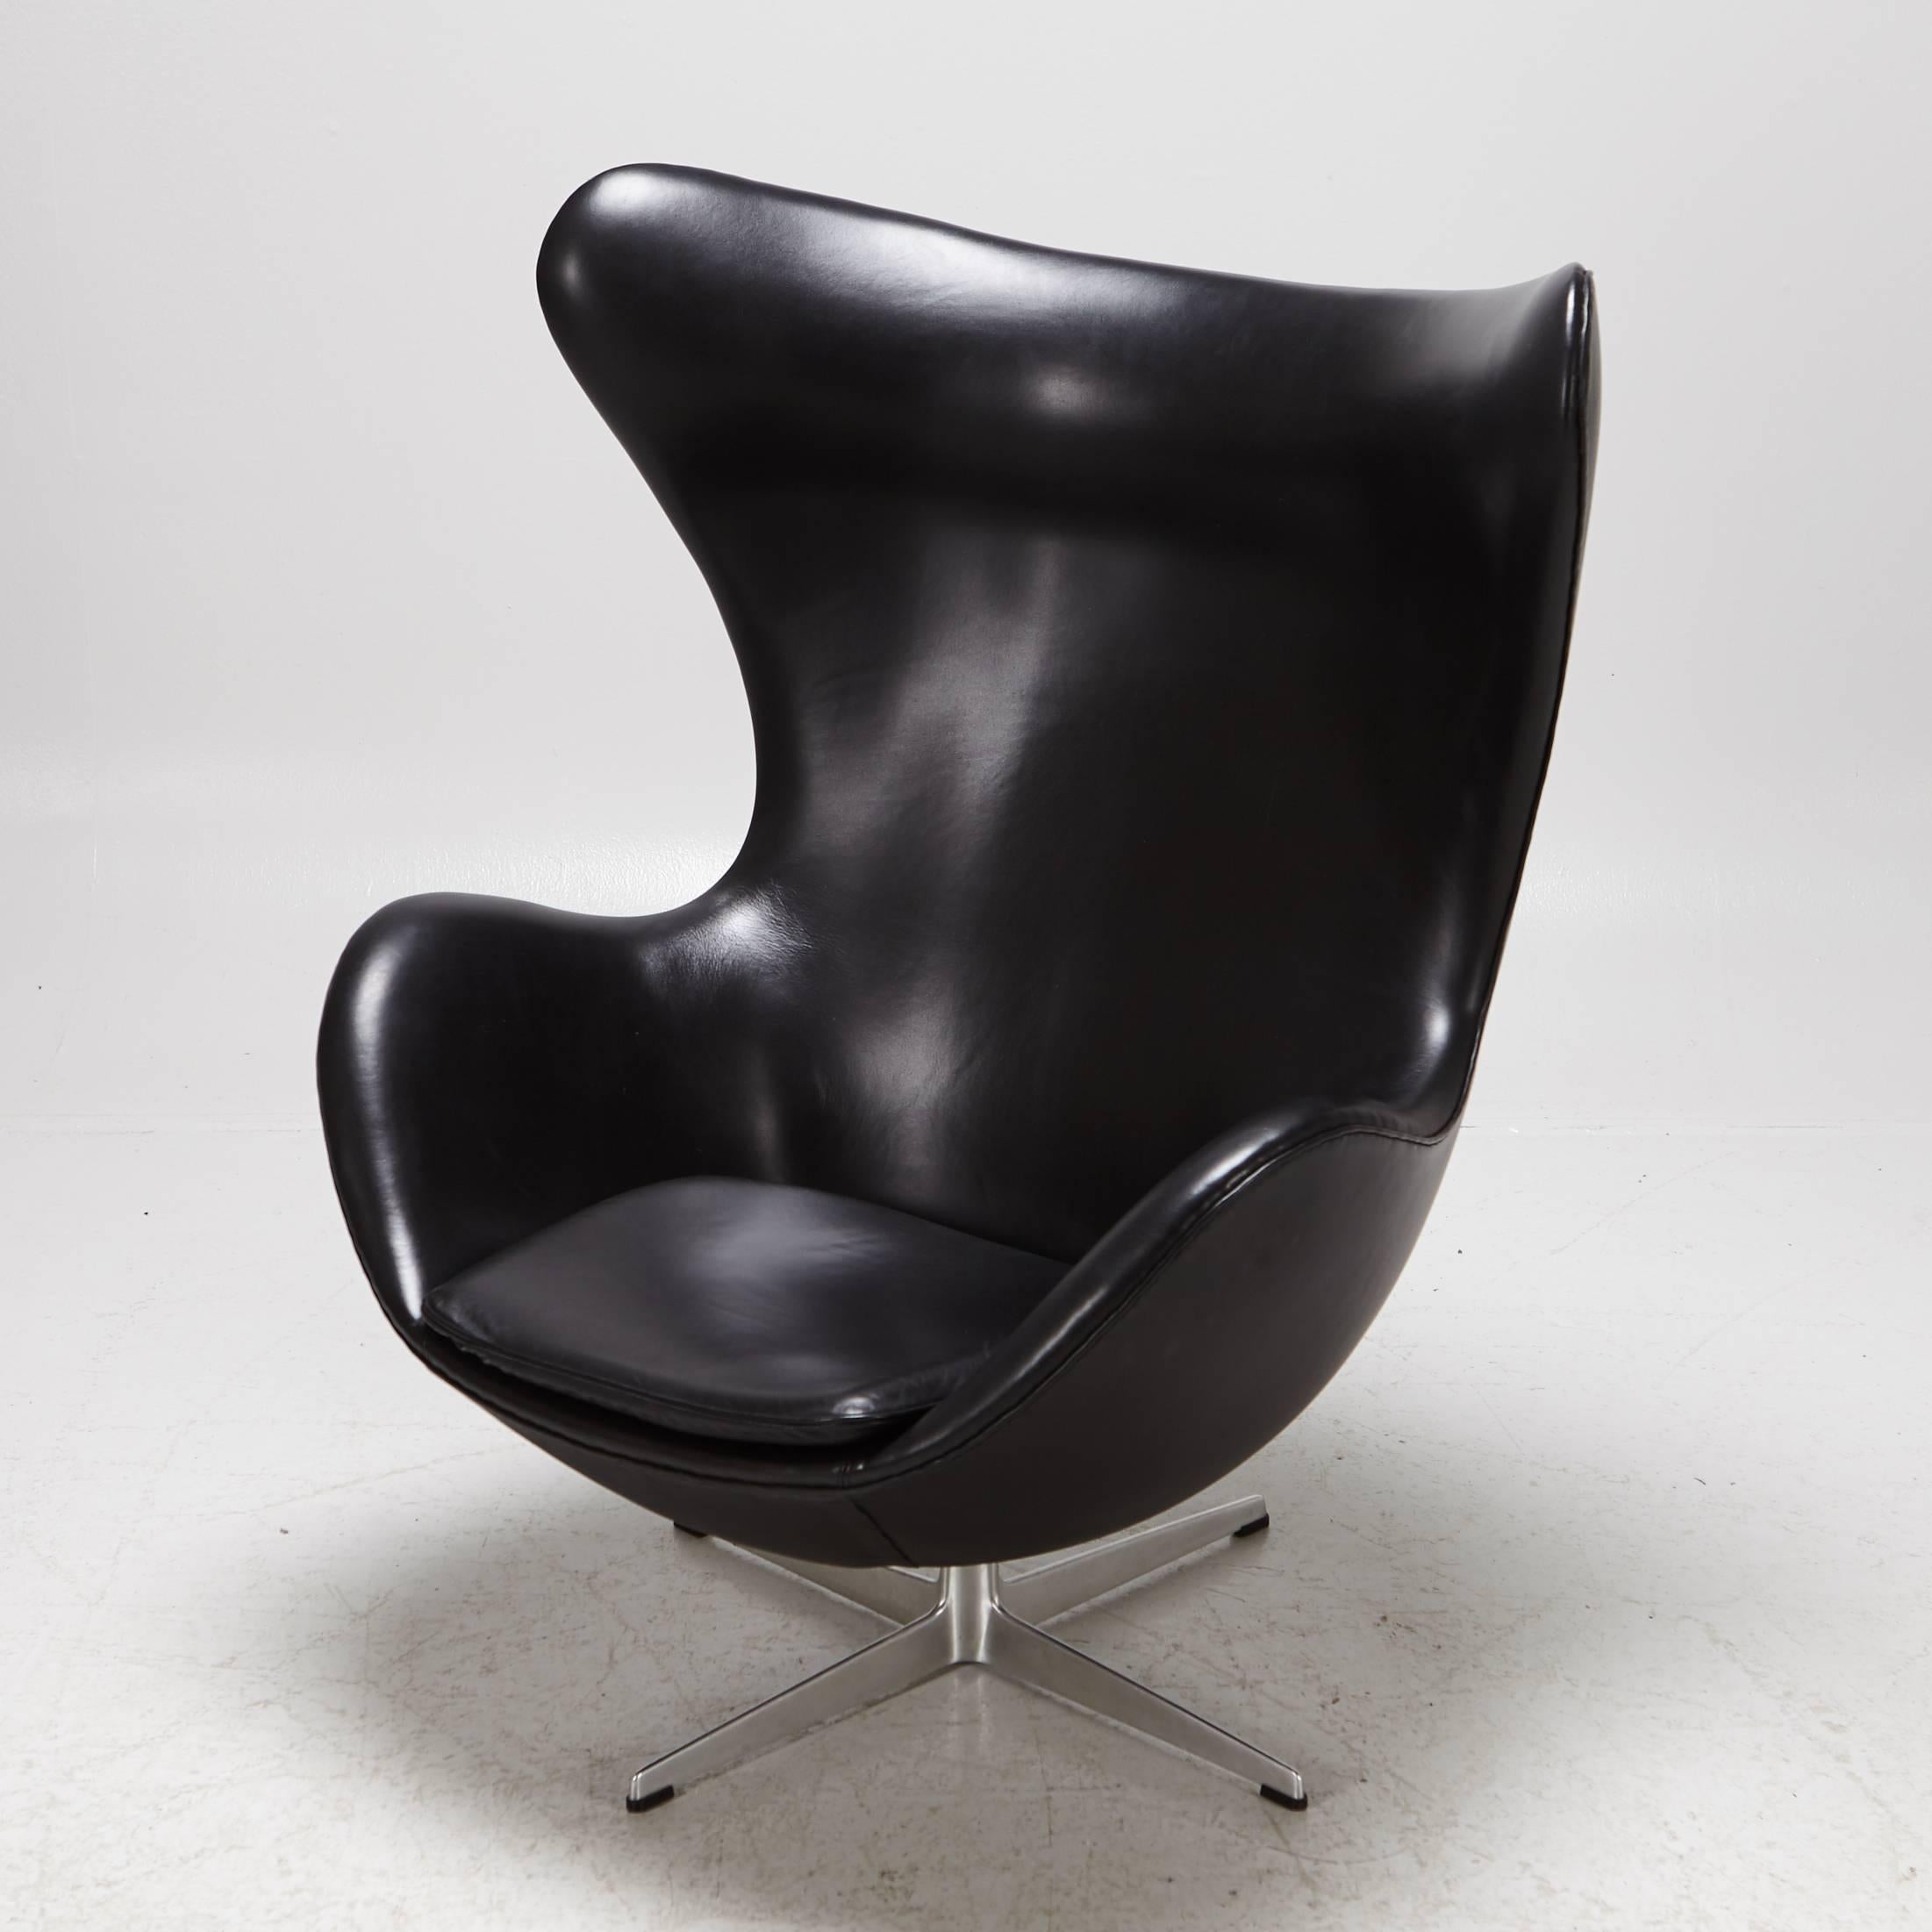 The iconic egg chair designed by Arne Jacobsen and manufactured by Fritz Hansen. This early edition of the chair features an aluminum frame with leather upholstery and the manufacturer's label.